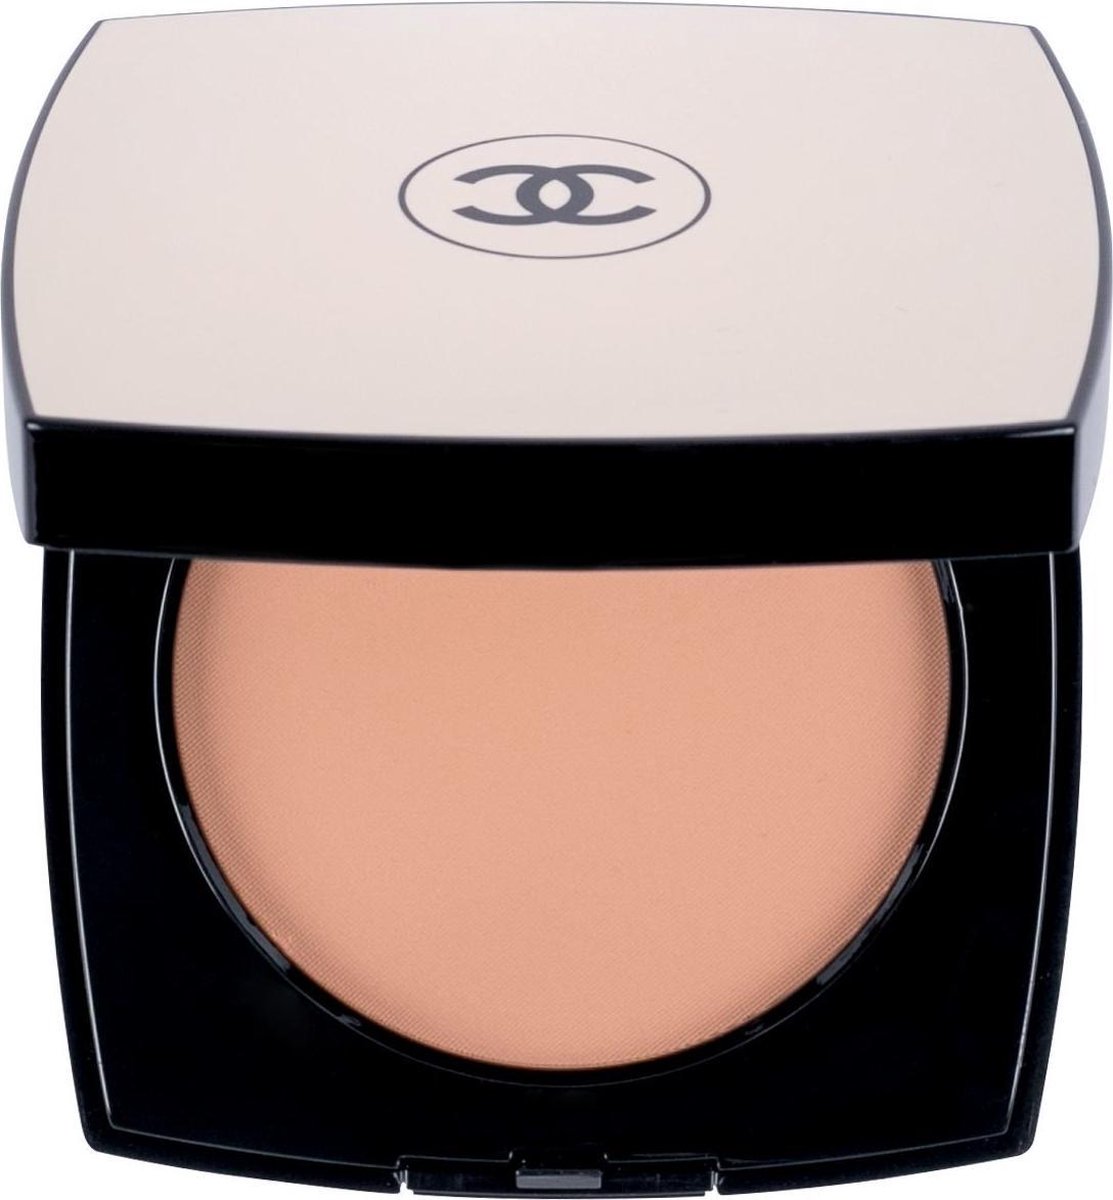 Compact Powders Les Beiges Chanel (12 g) - Chanel